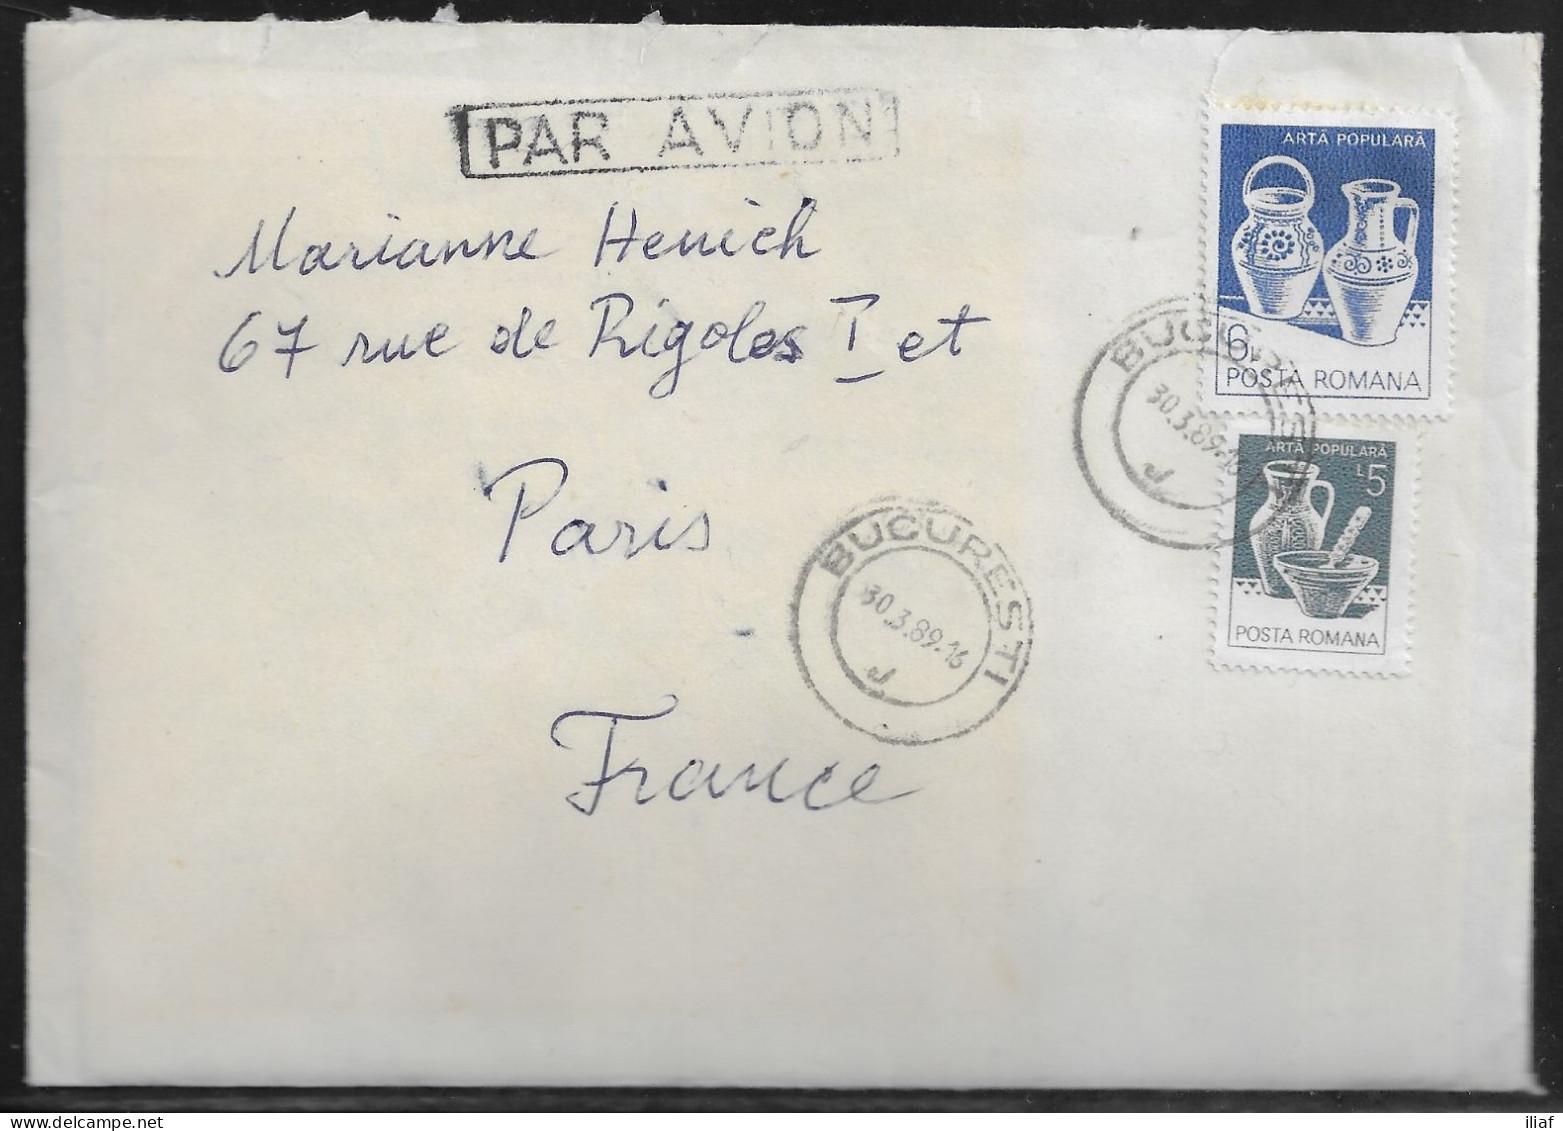 Romania. Stamps Sc. 3109-3110 On Air Mail Letter, Sent From Bucharest On 30.03.1989 To France. Letter Inside - Lettres & Documents